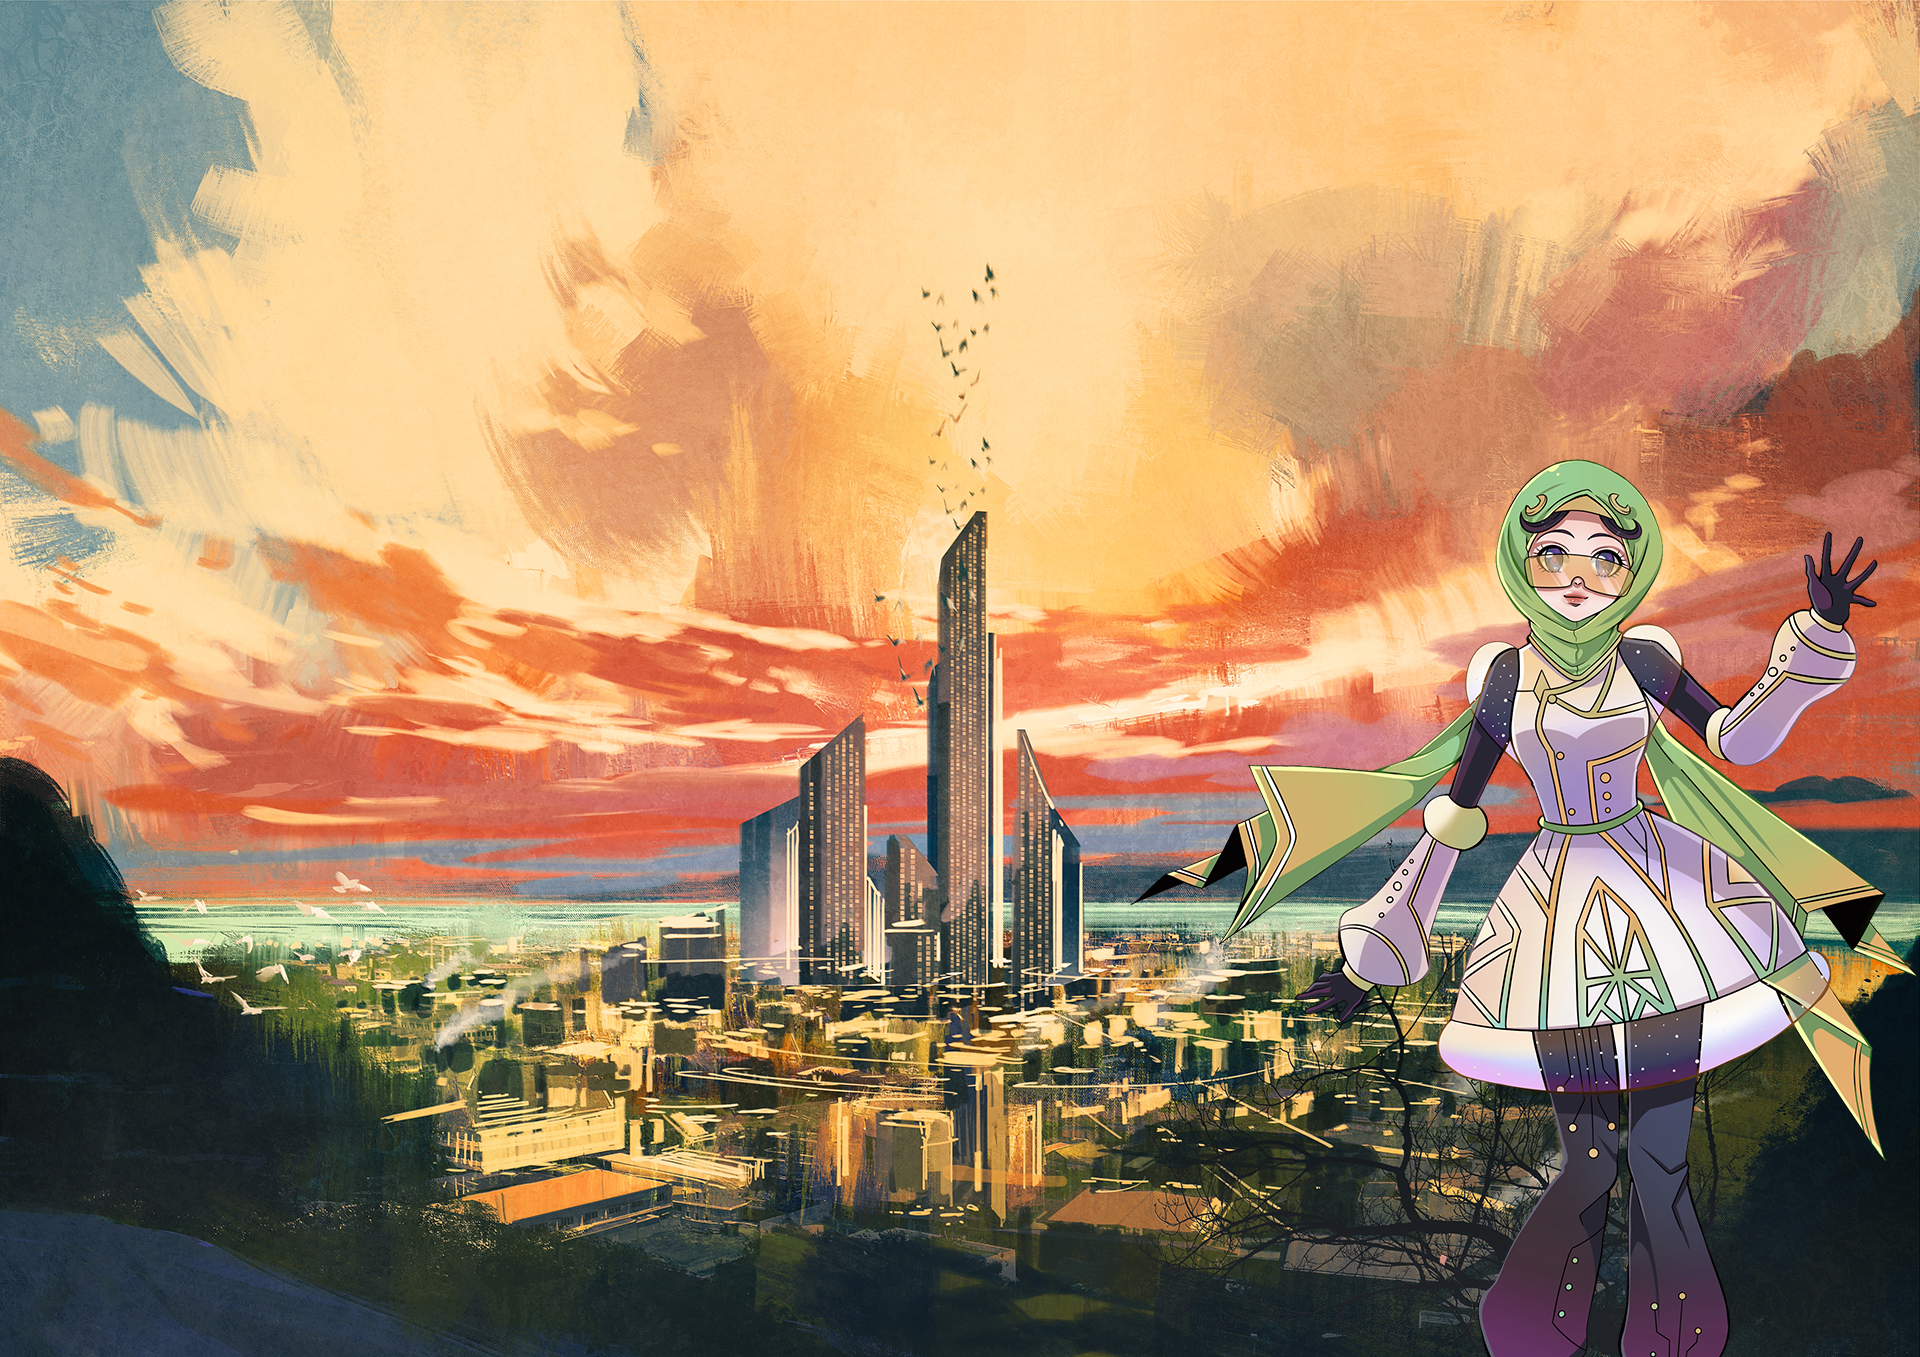 Anime-style girl wearing a hijab waving at the viewer in front of a painted-style city with an orange sky